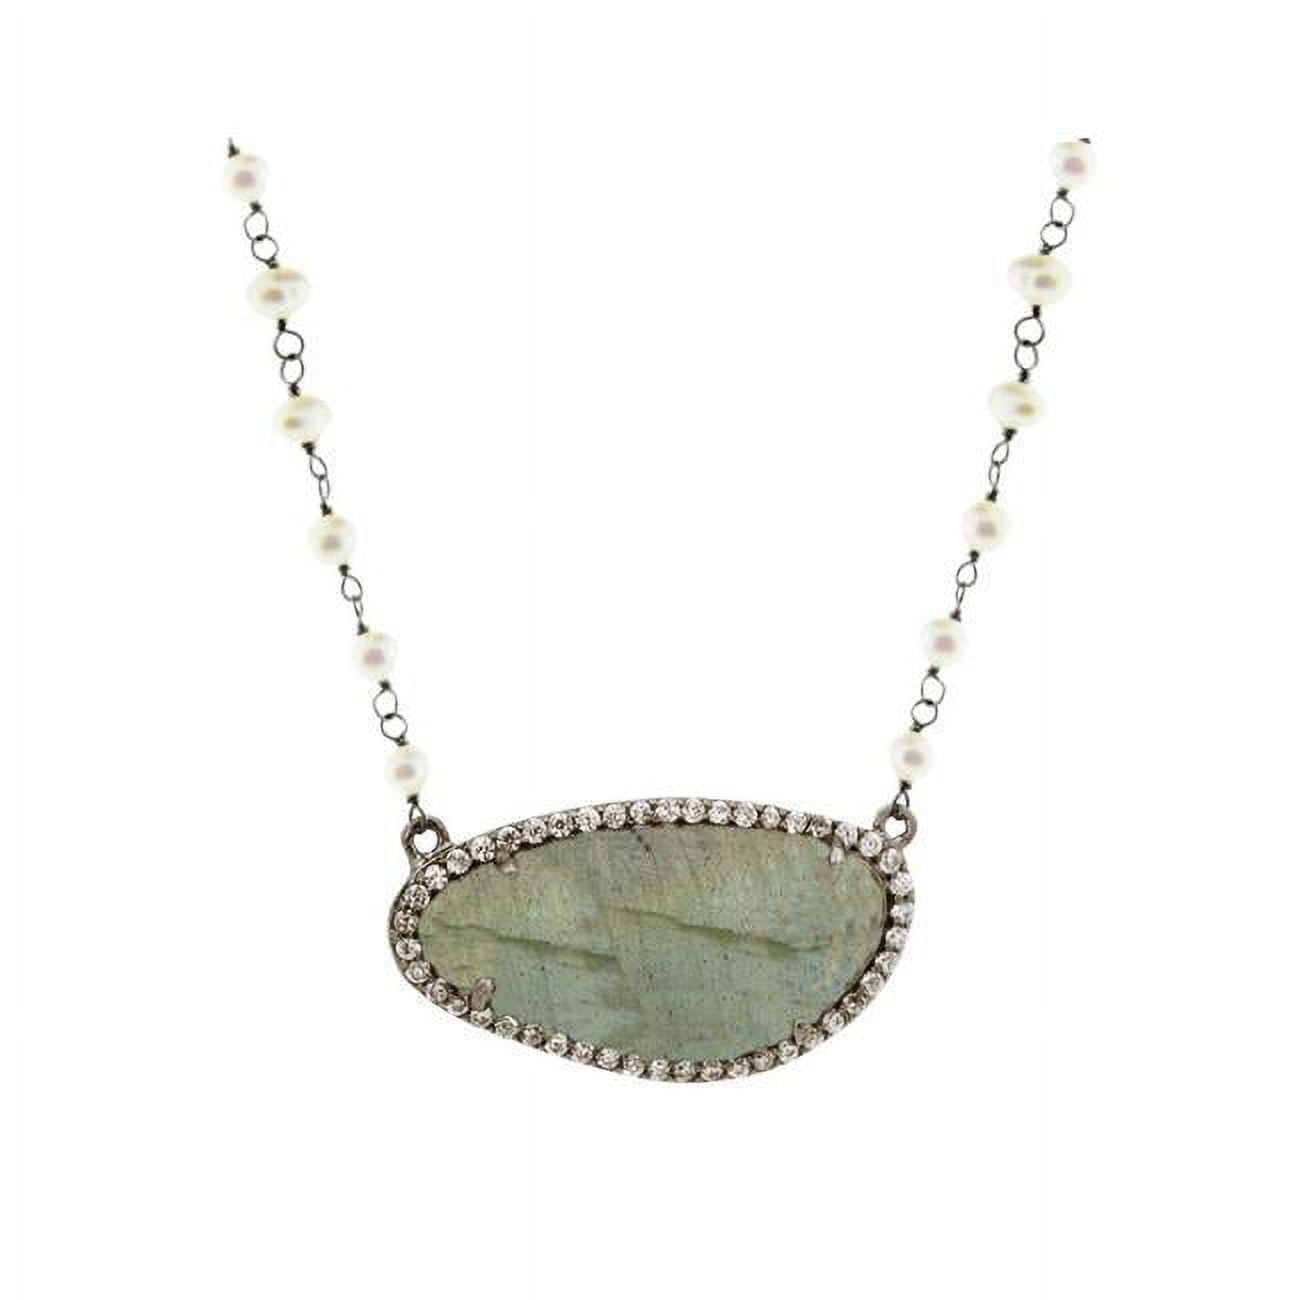 Picture of Fronay 9L1109P Labradorite Stone Slice & Mini Pearls Necklace in Black Sterling Silver